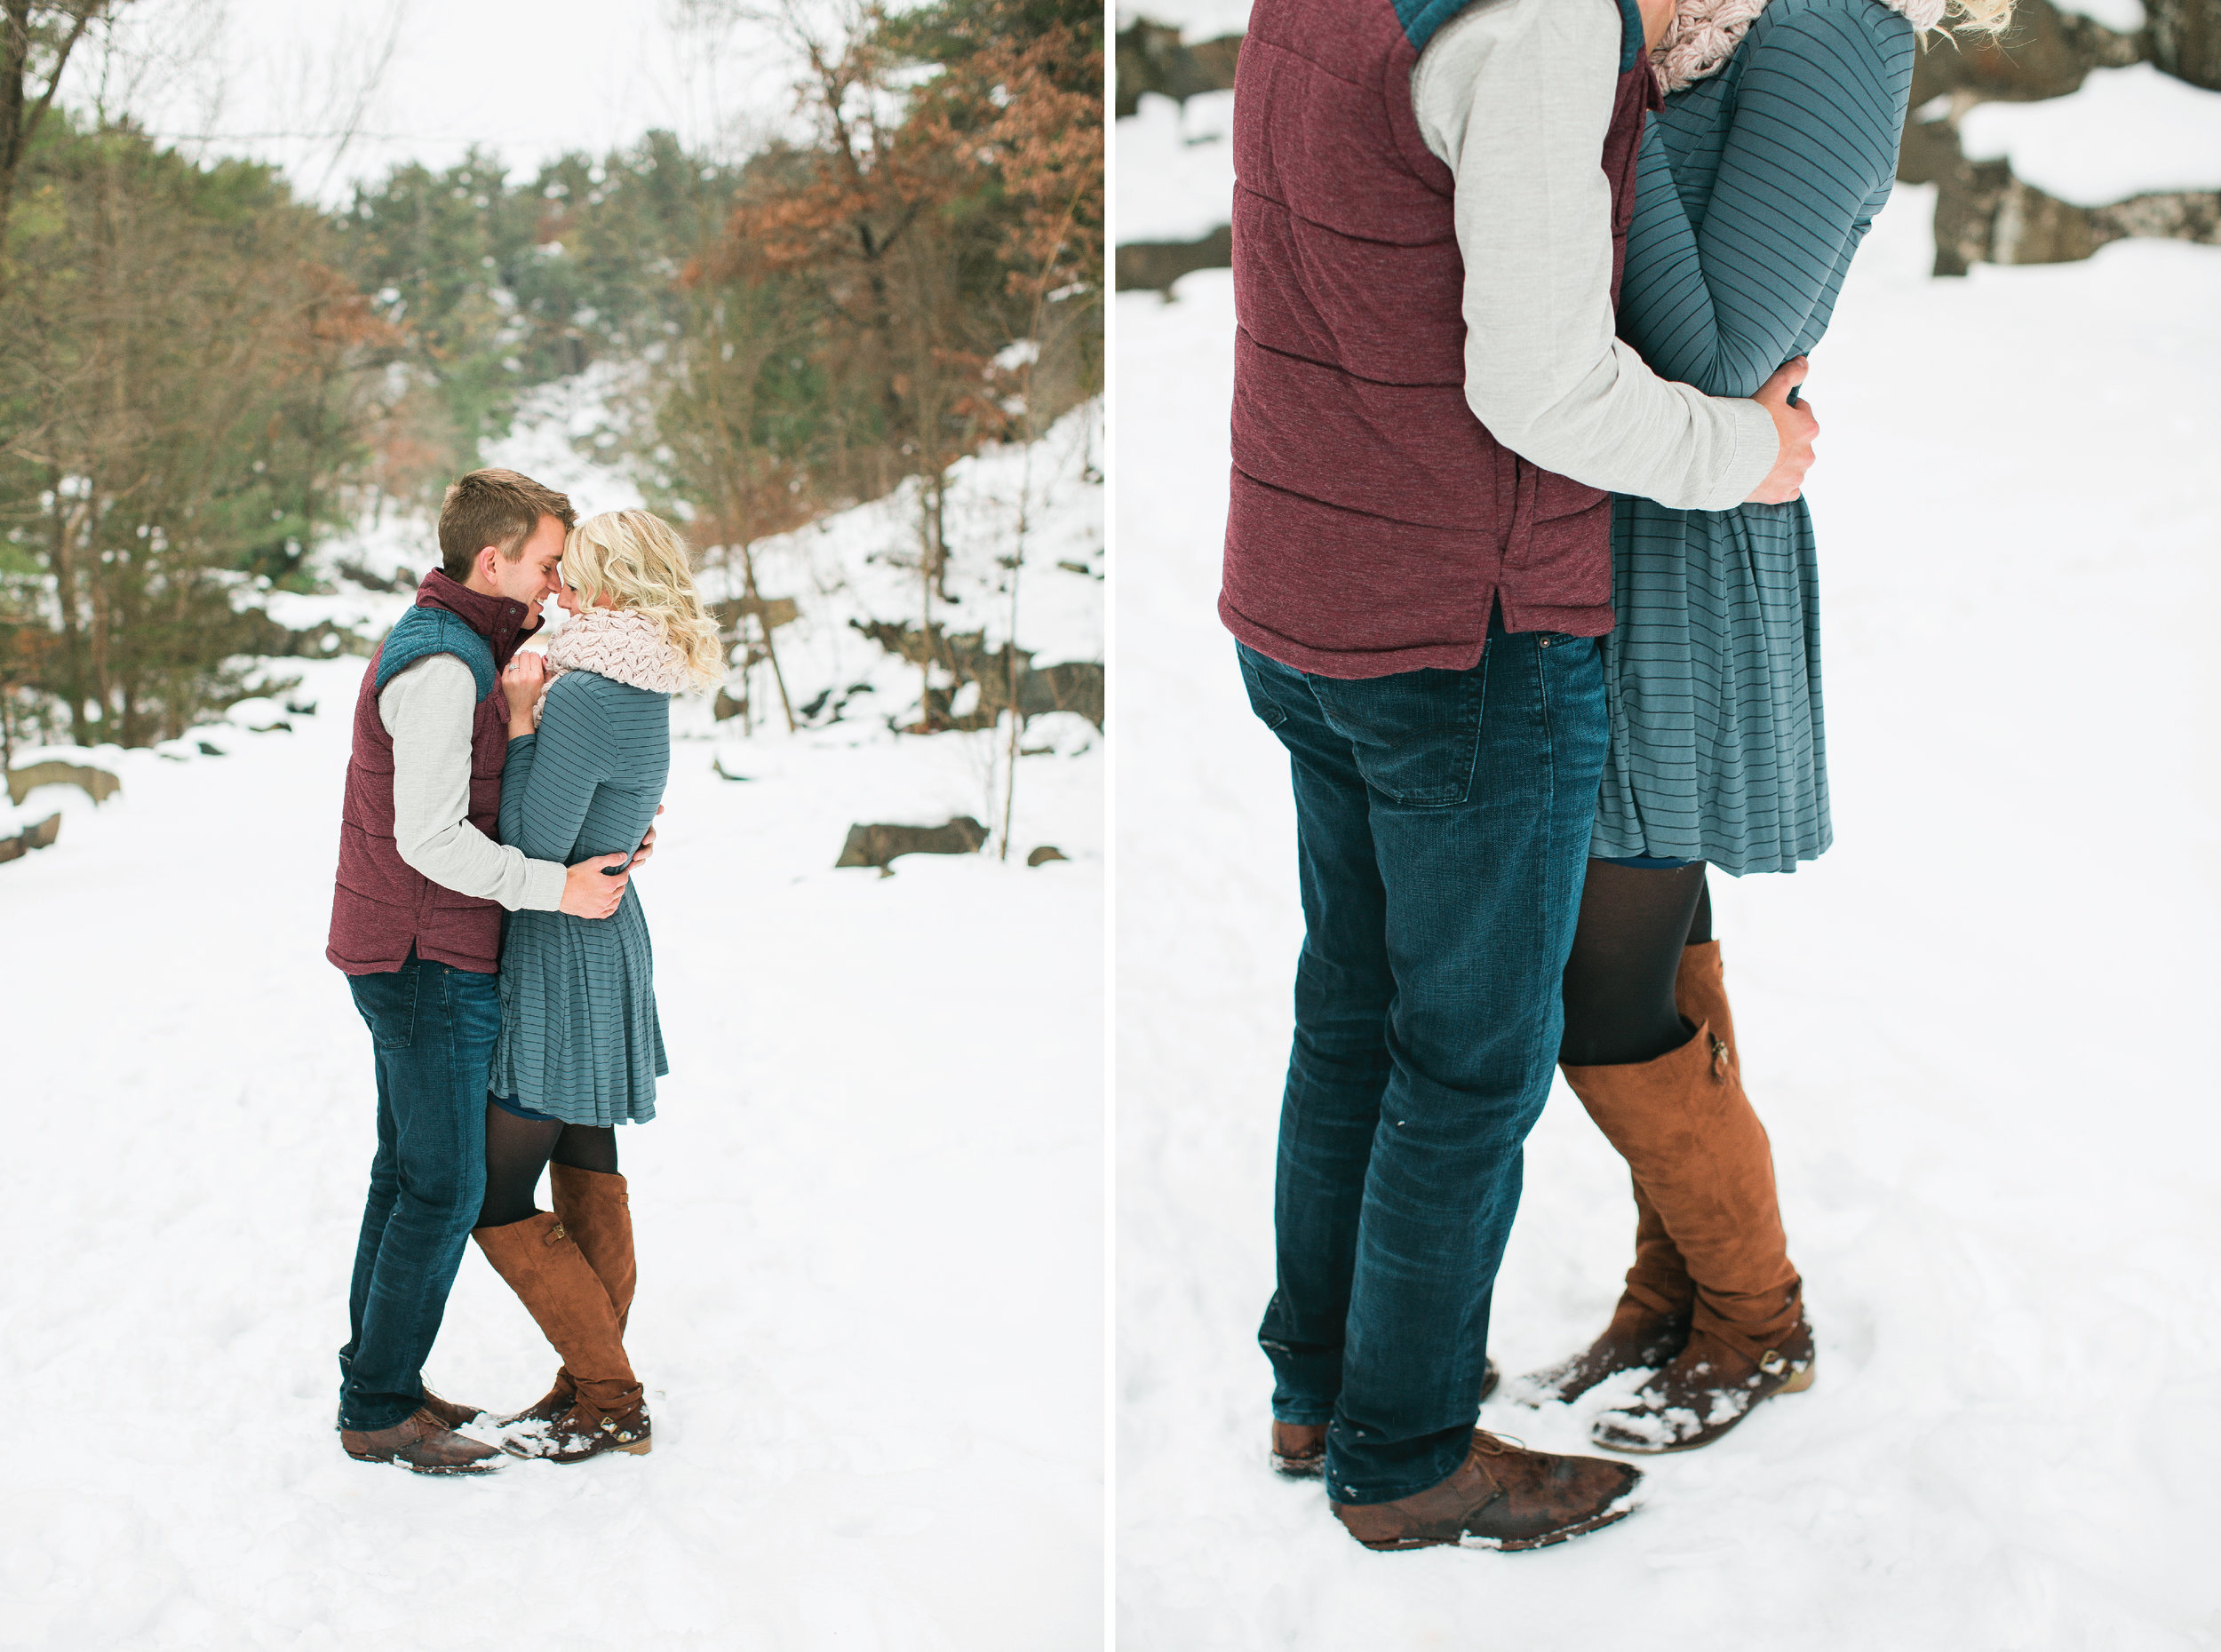 Taylors Falls Minnesota snowy winter engagement session in the woods with couple kissing